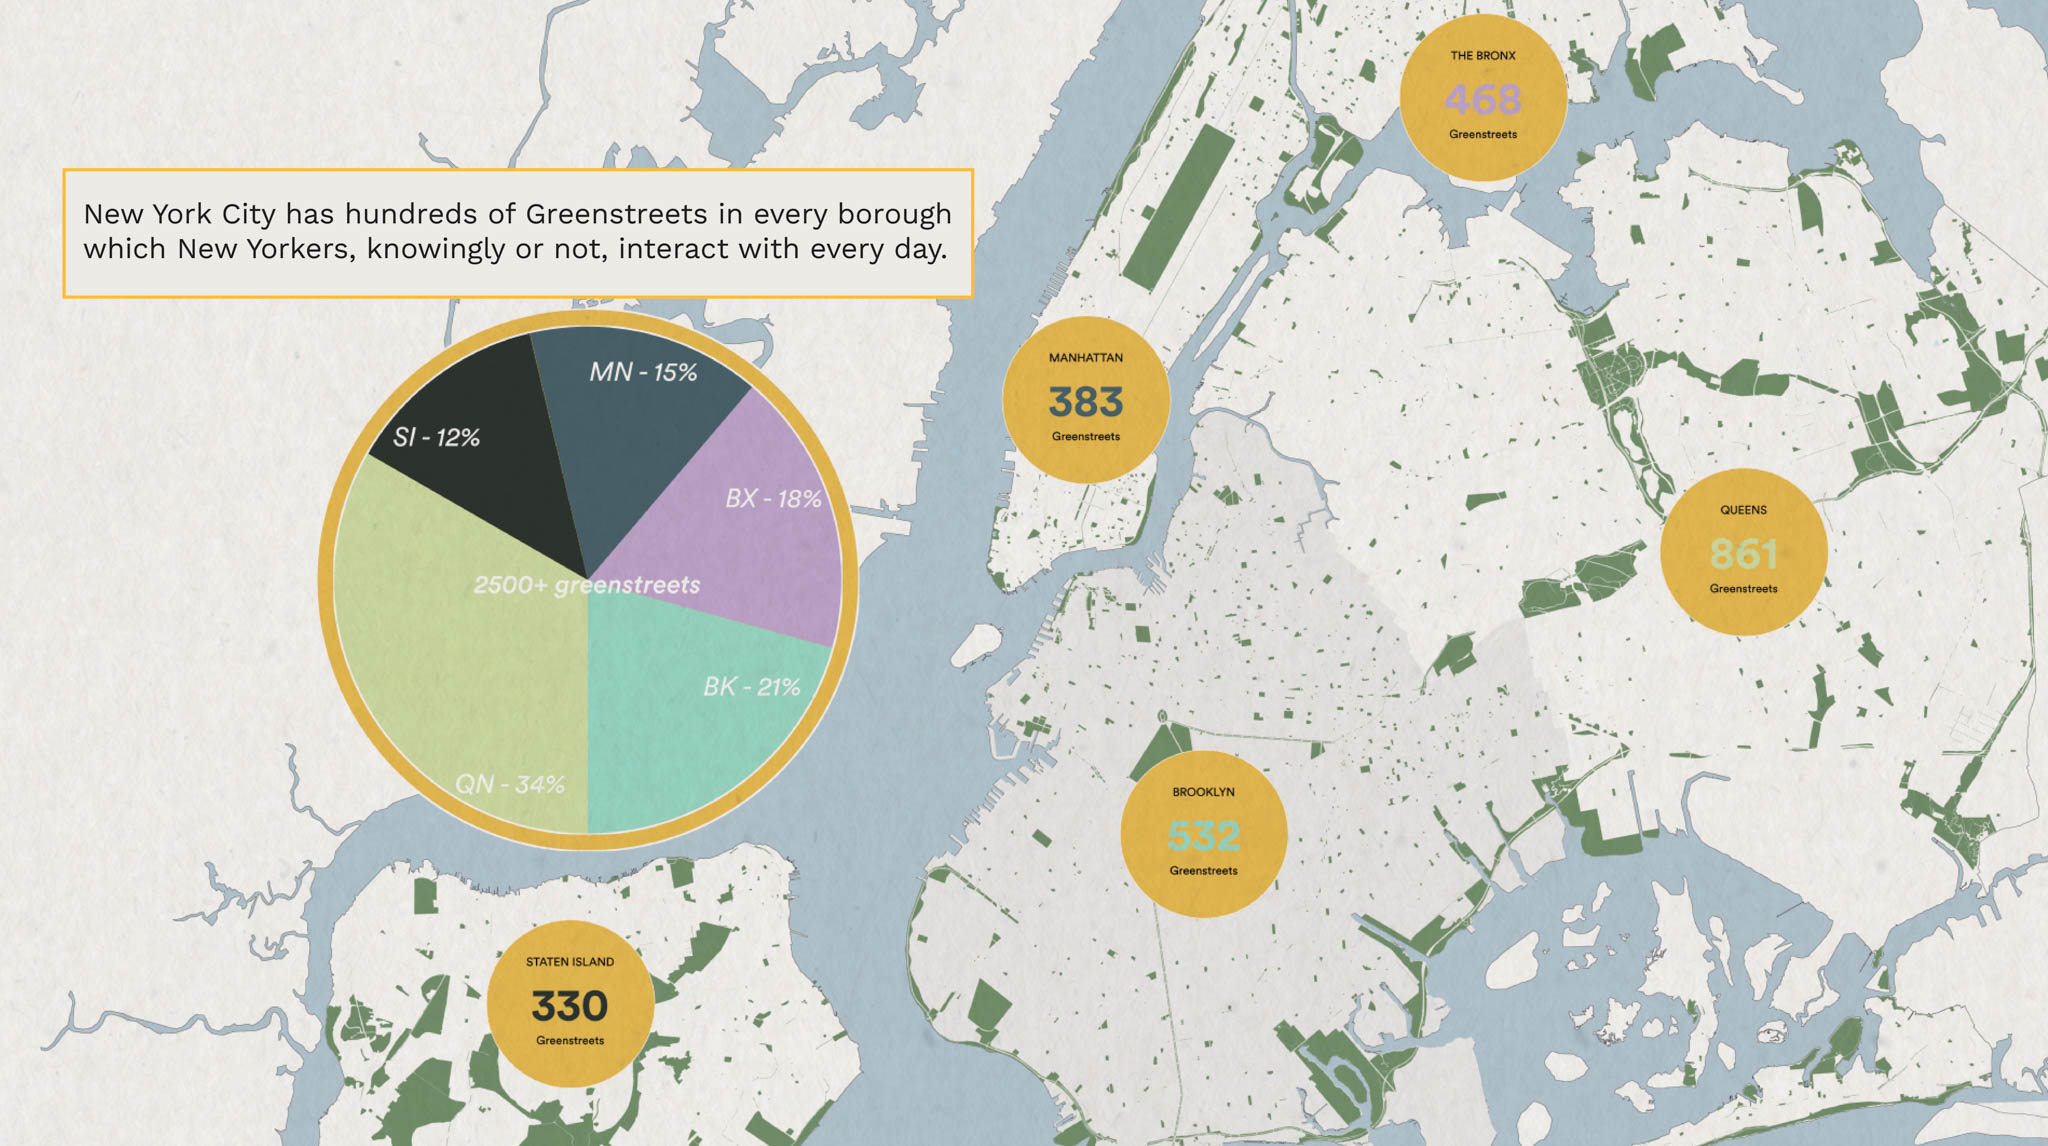 pie graph and map of where greenstreets are in New York City burrows